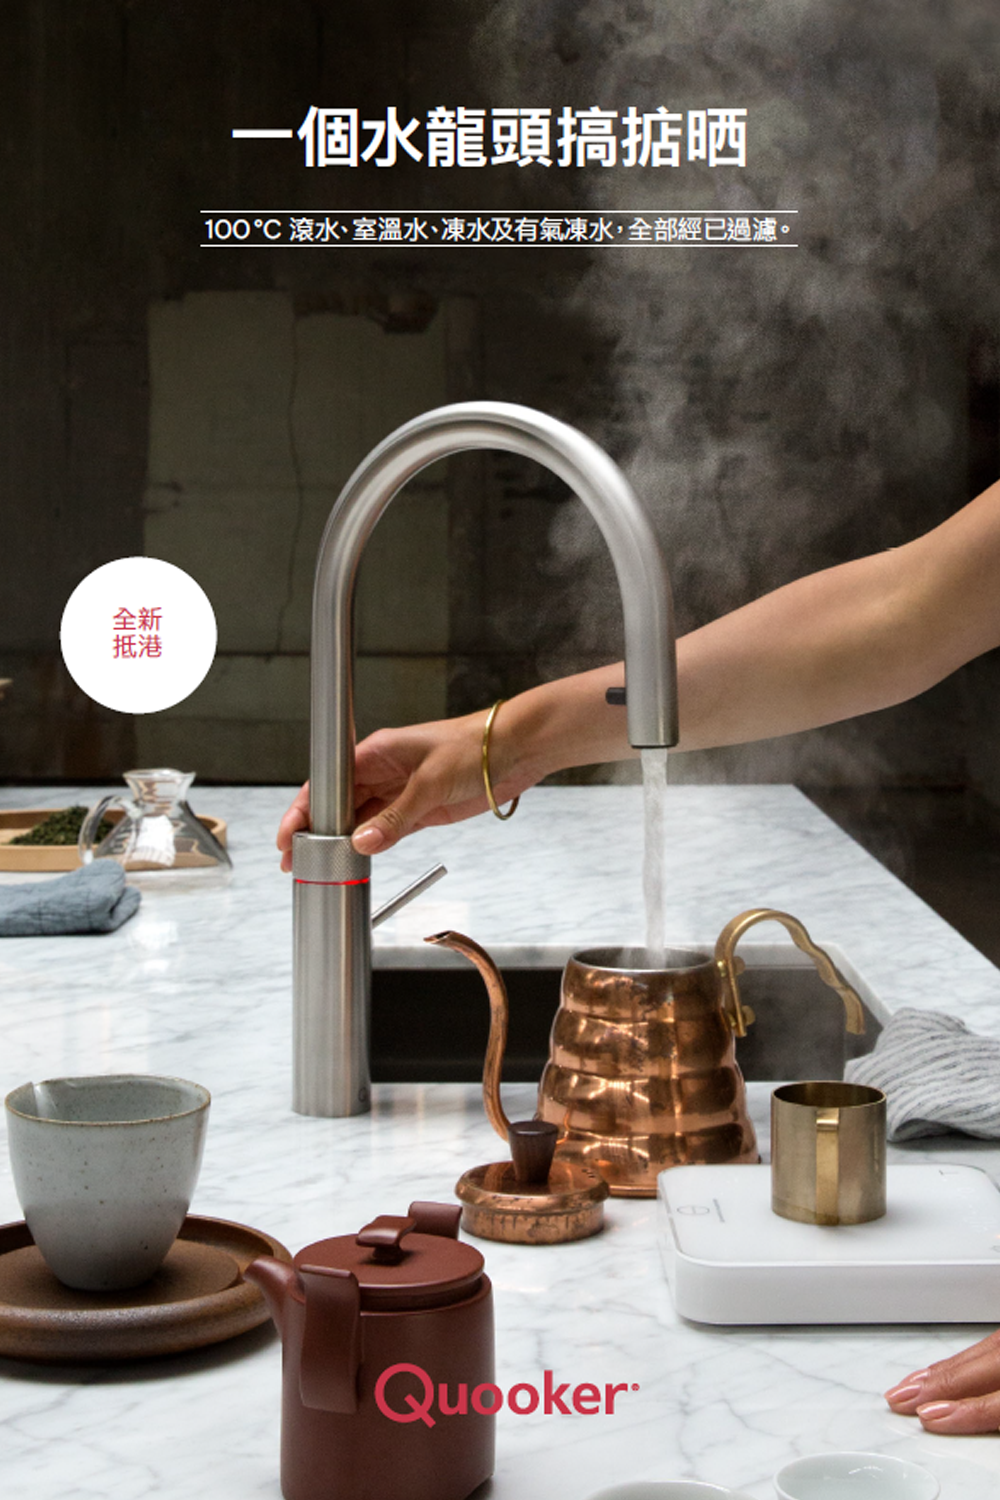 【QUOOKER】NORDIC SQUARE Single Tap Instant Hot/or Warm/or Chilled/or Sparkling Water Tap |來自荷蘭 | 